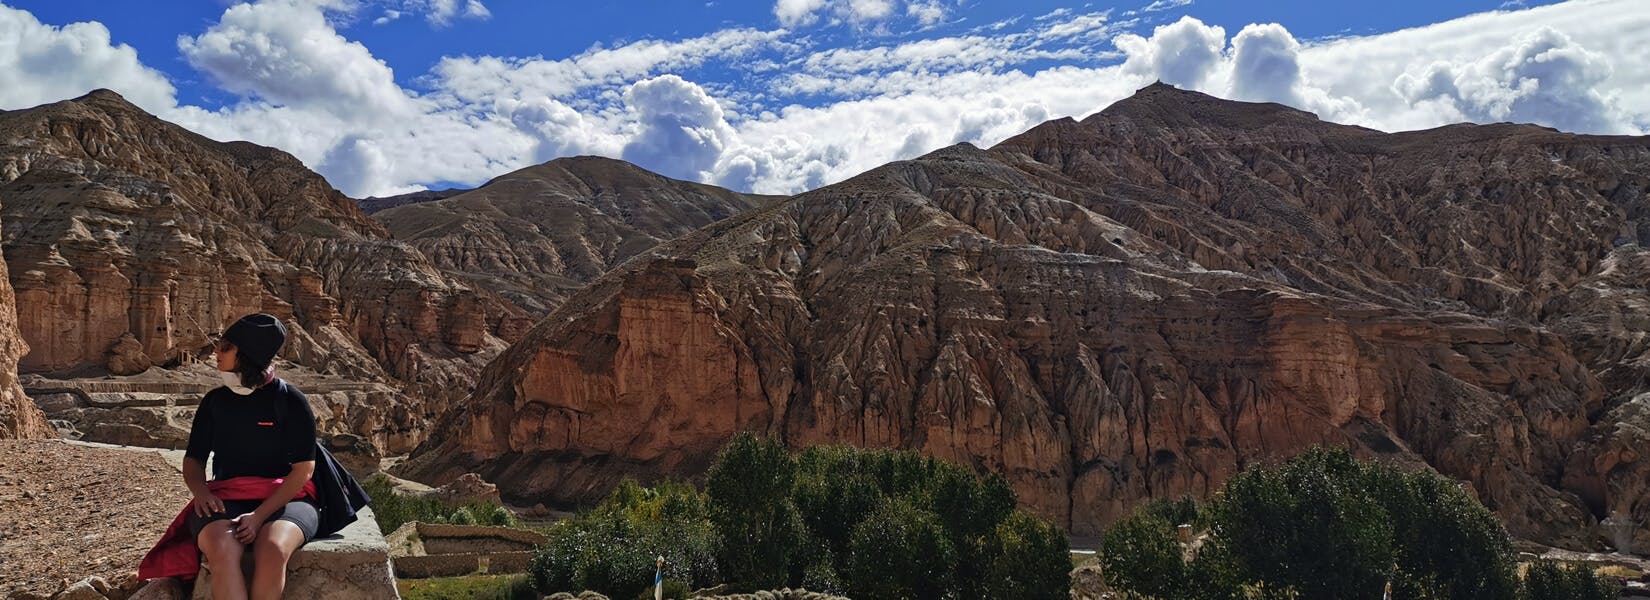 Upper Mustang Overland Tour Attractions